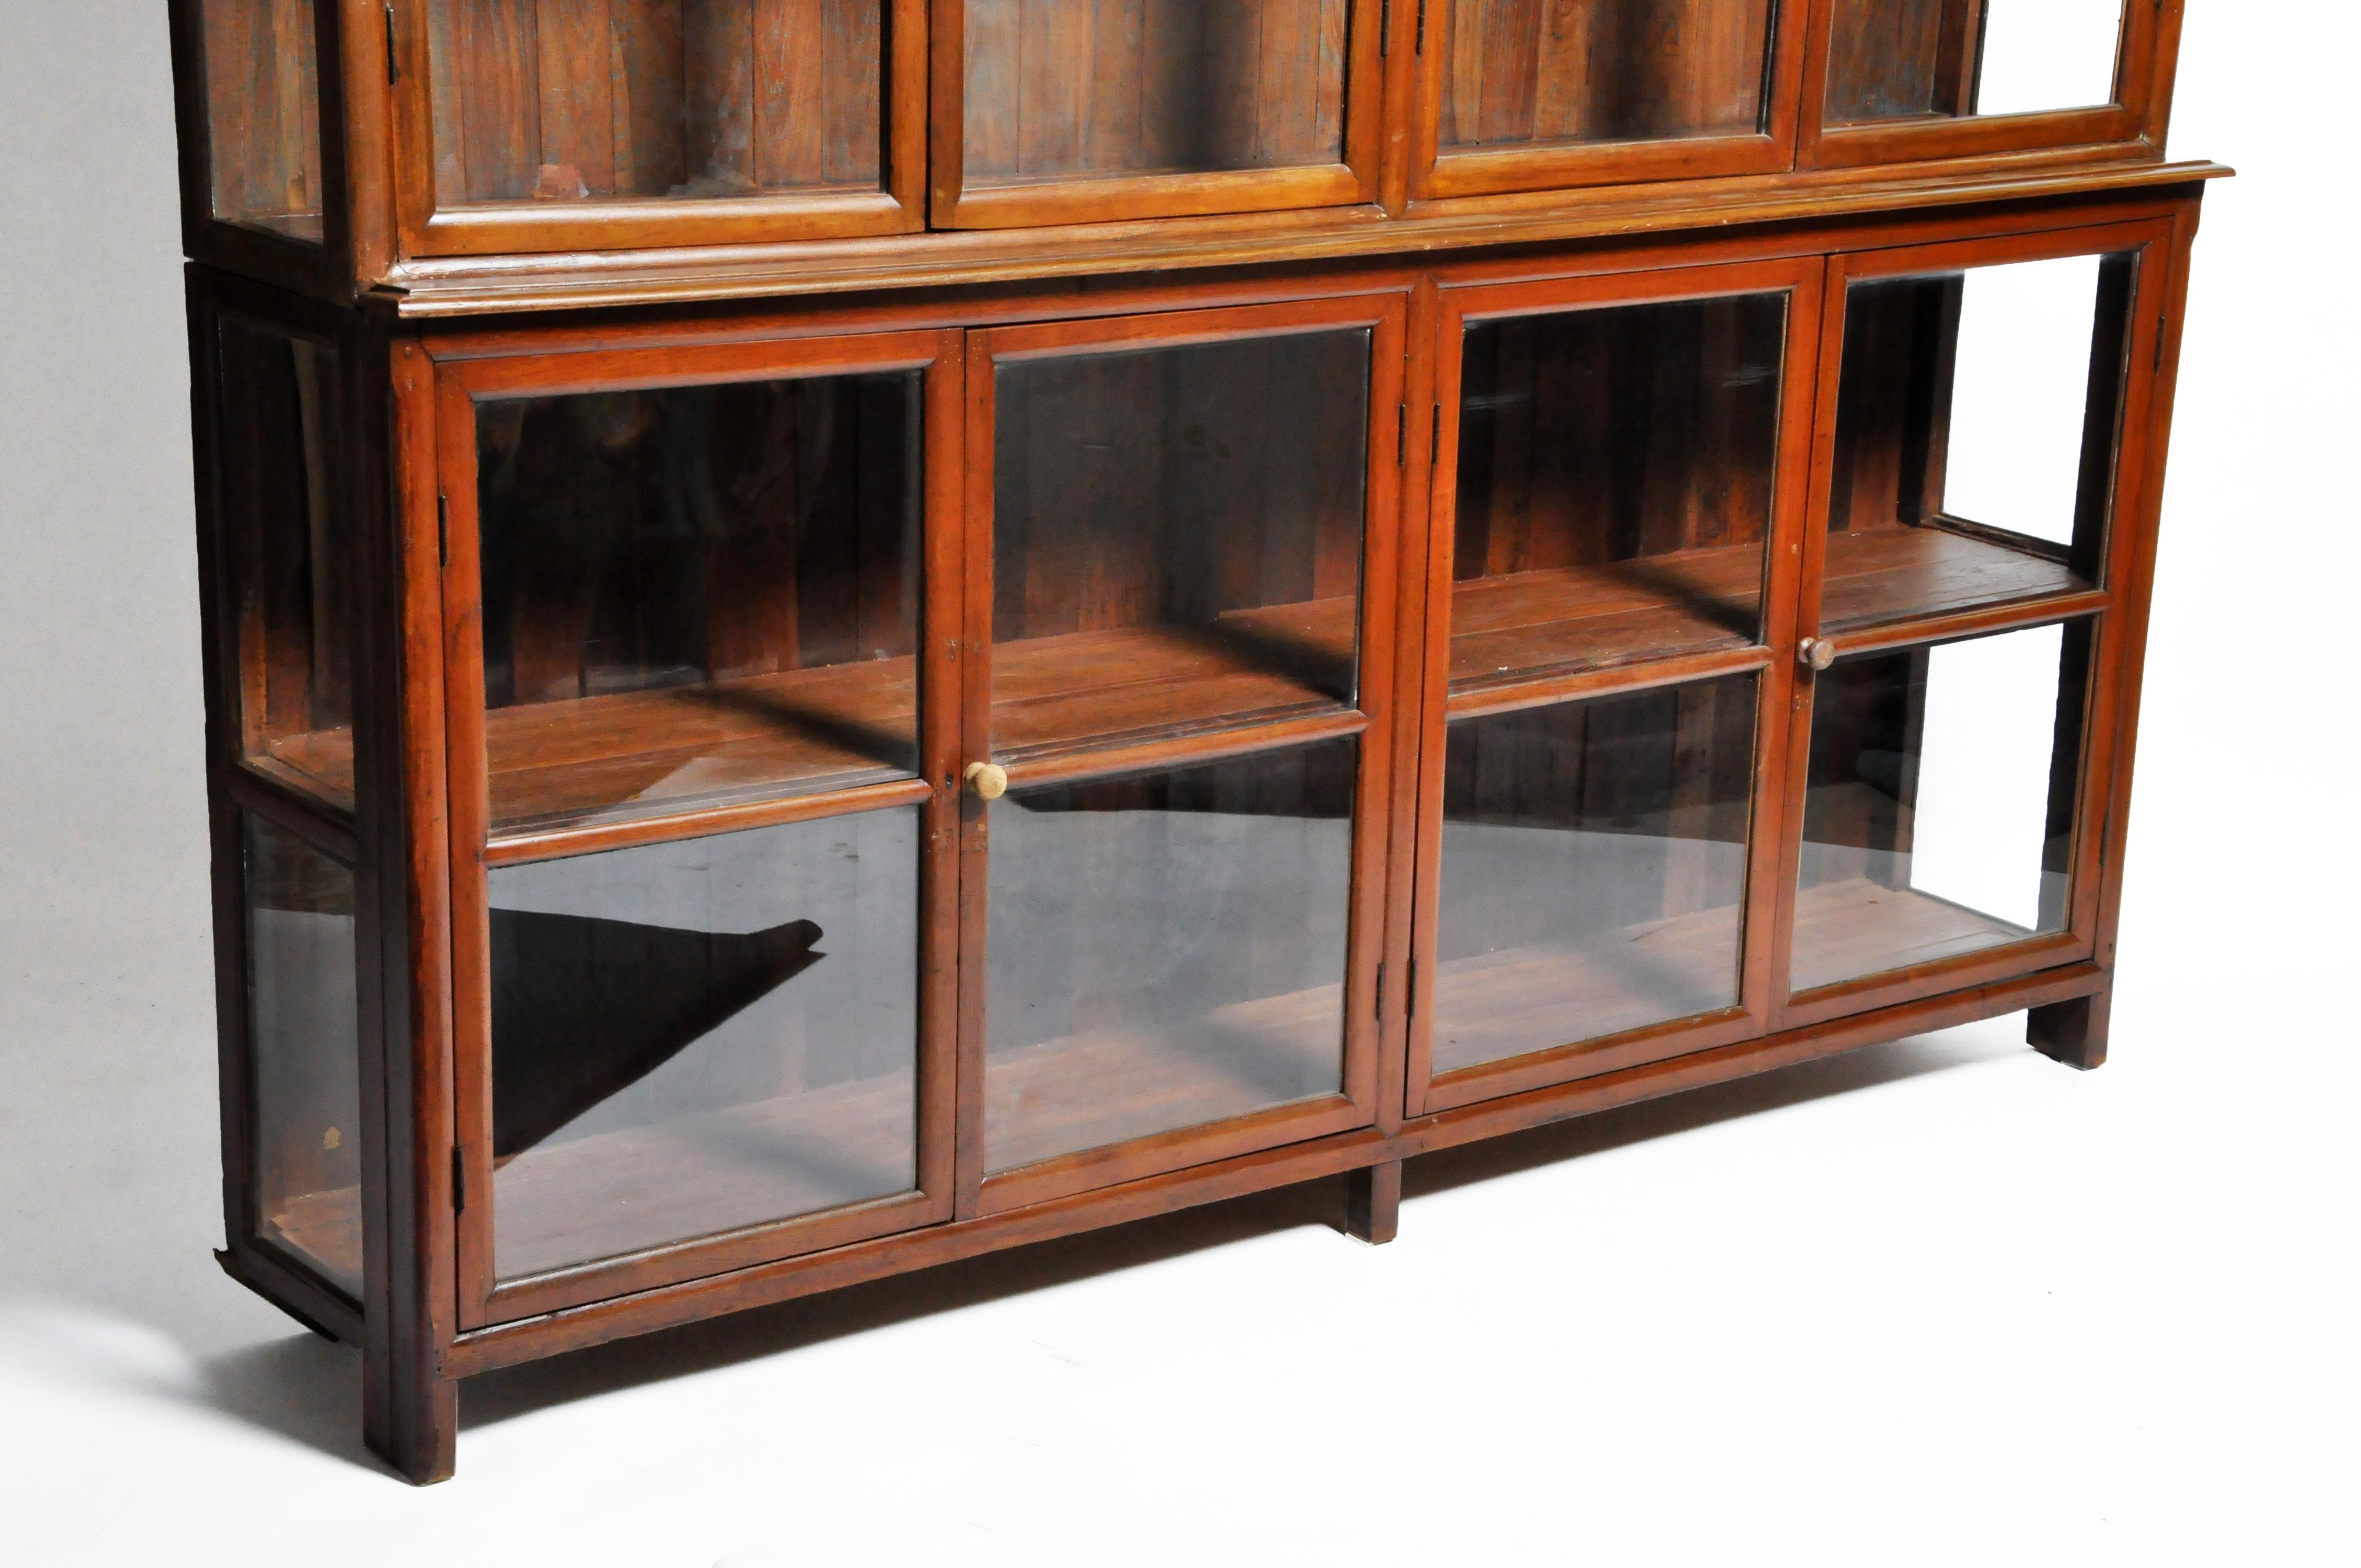 20th Century British Colonial Art Deco Breakfront Bookcase with Four Pairs of Doors